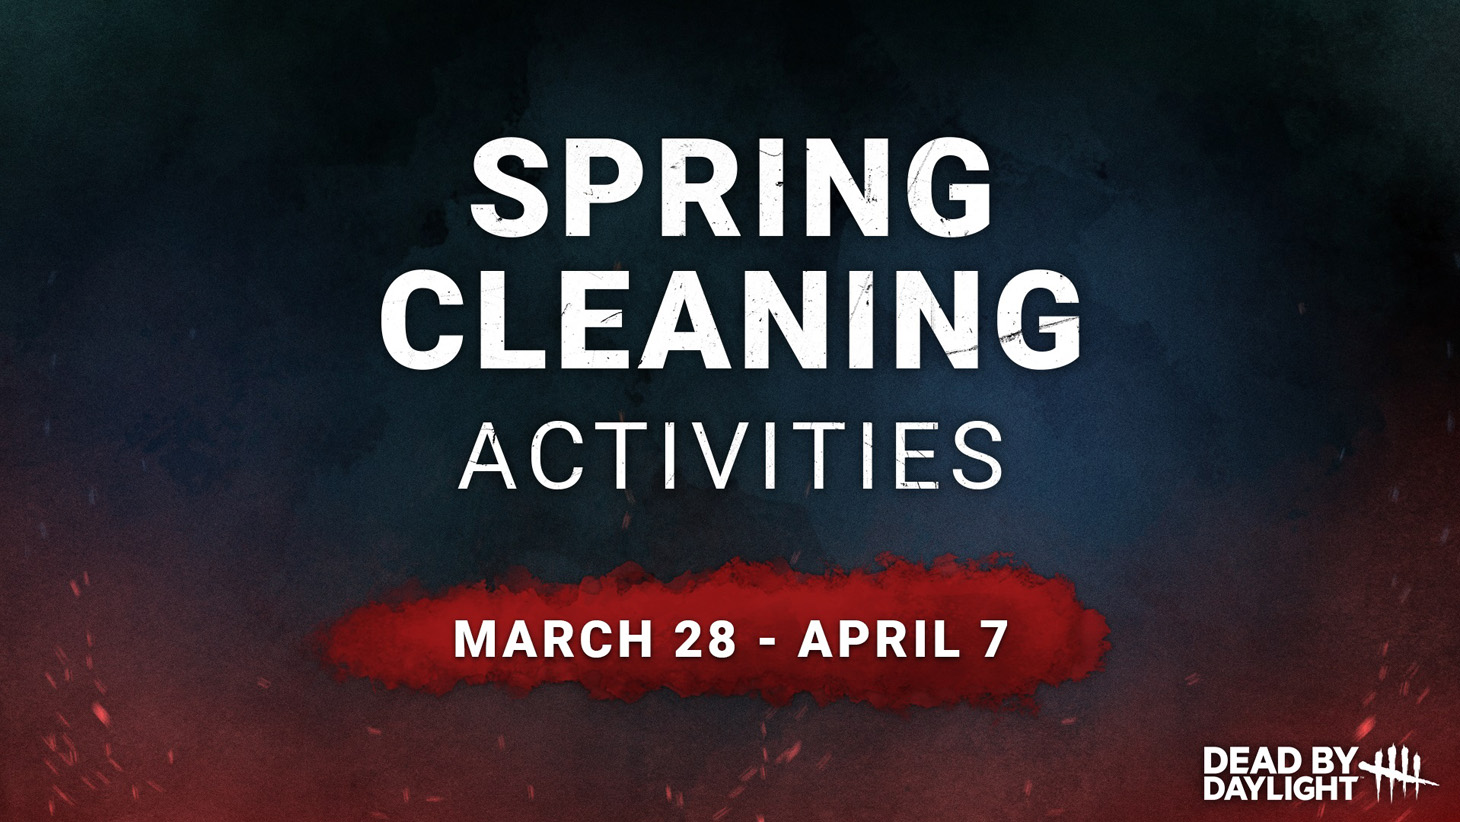 Dead by Daylight Spring Cleaning event has begun